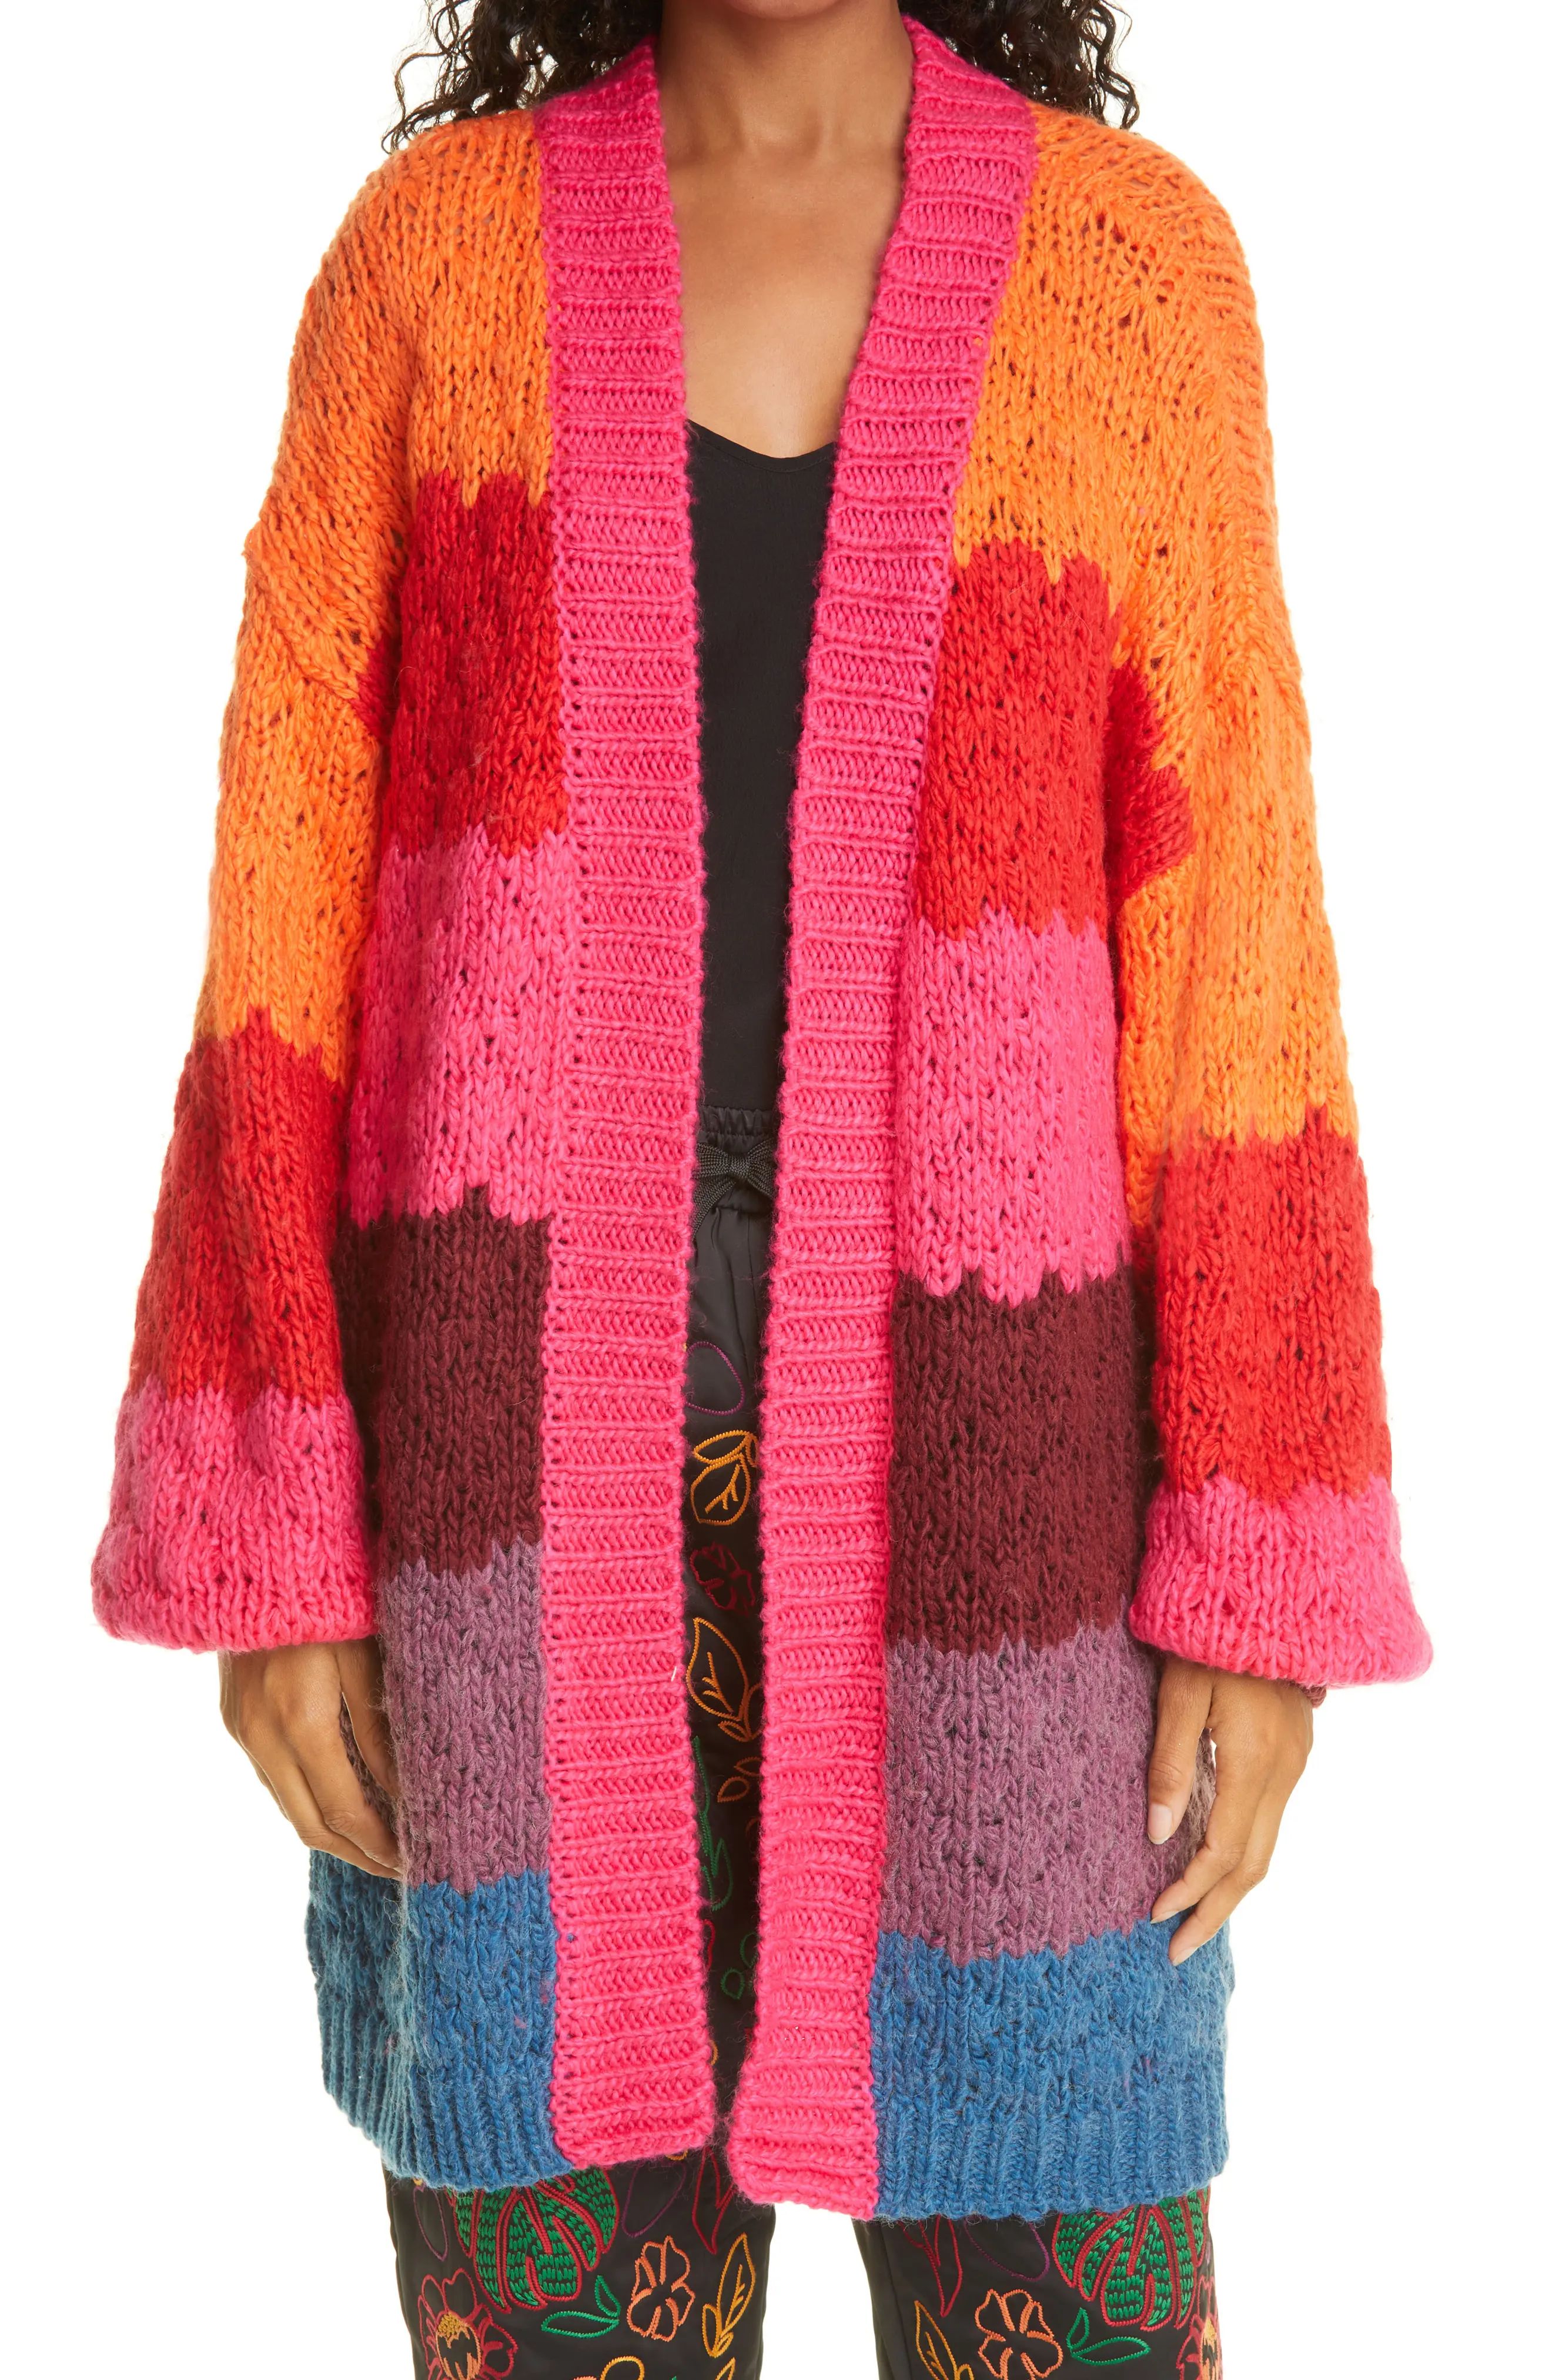 FARM Rio Stripe Open Front Long Cardigan in Multi at Nordstrom, Size Large | Nordstrom